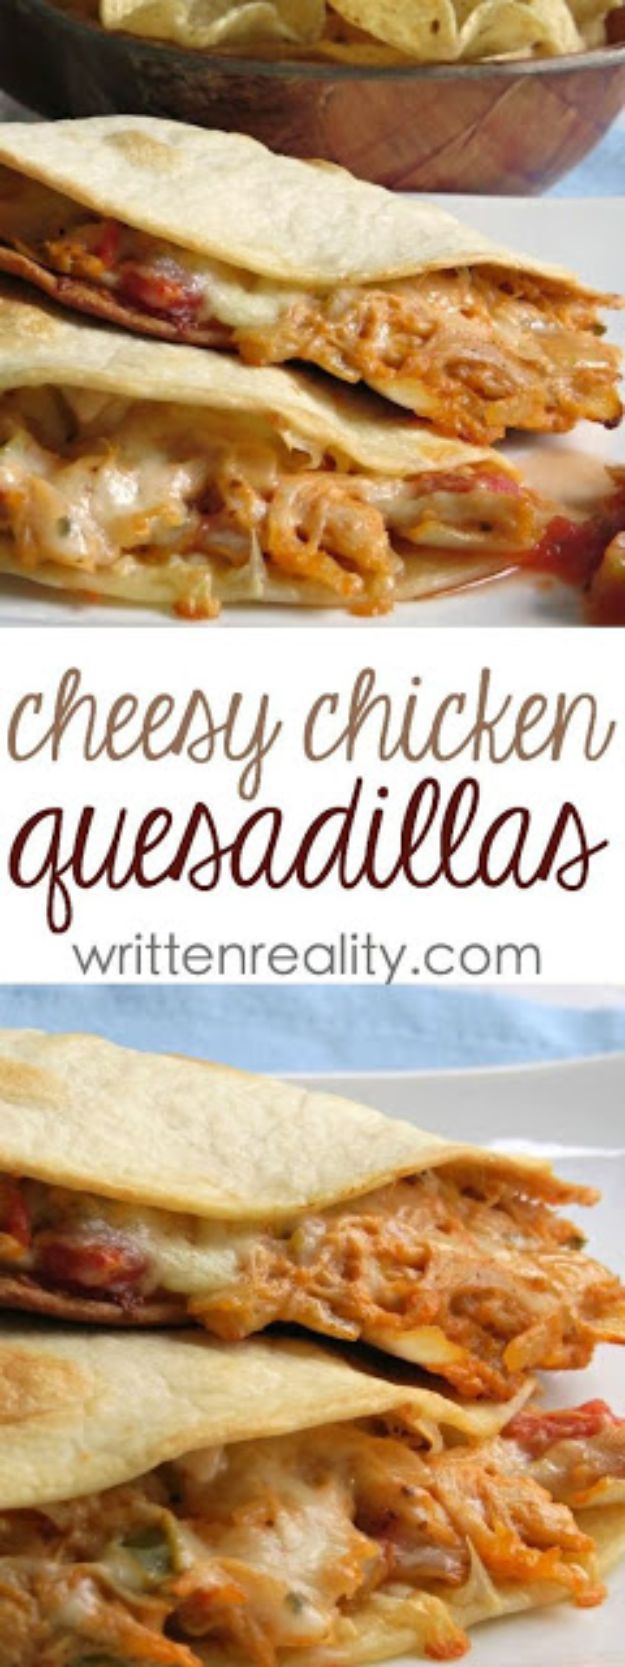 Best Mexican Food Recipes - Cheesy Chicken Quesadillas - Authentic Mexican Foods and Recipe Ideas for Casseroles, Quesadillas, Tacos, Appetizers, Tamales, Enchiladas, Crockpot, Chicken, Beef and Healthy Foods - Desserts and  dessert#recipes #mexican